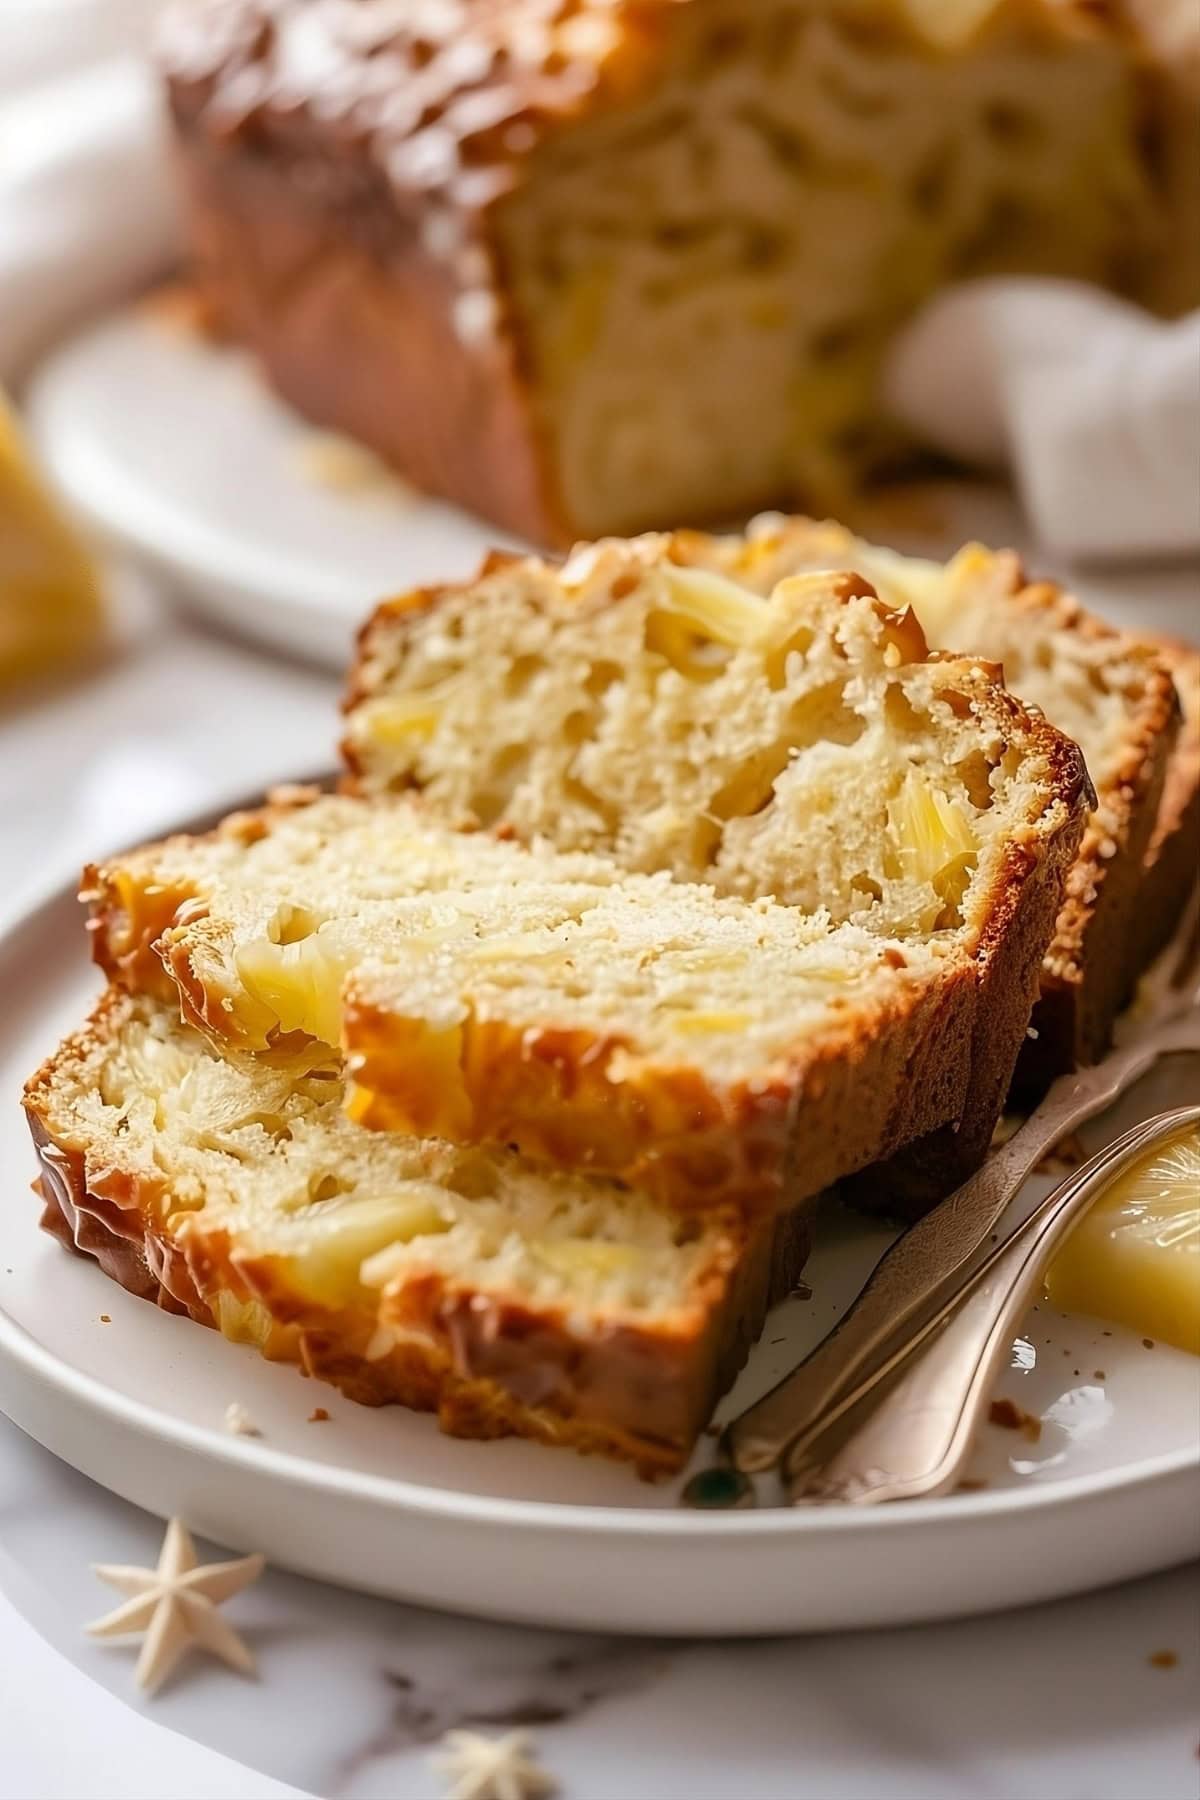 Sliced pineapple quick bread on a plate.